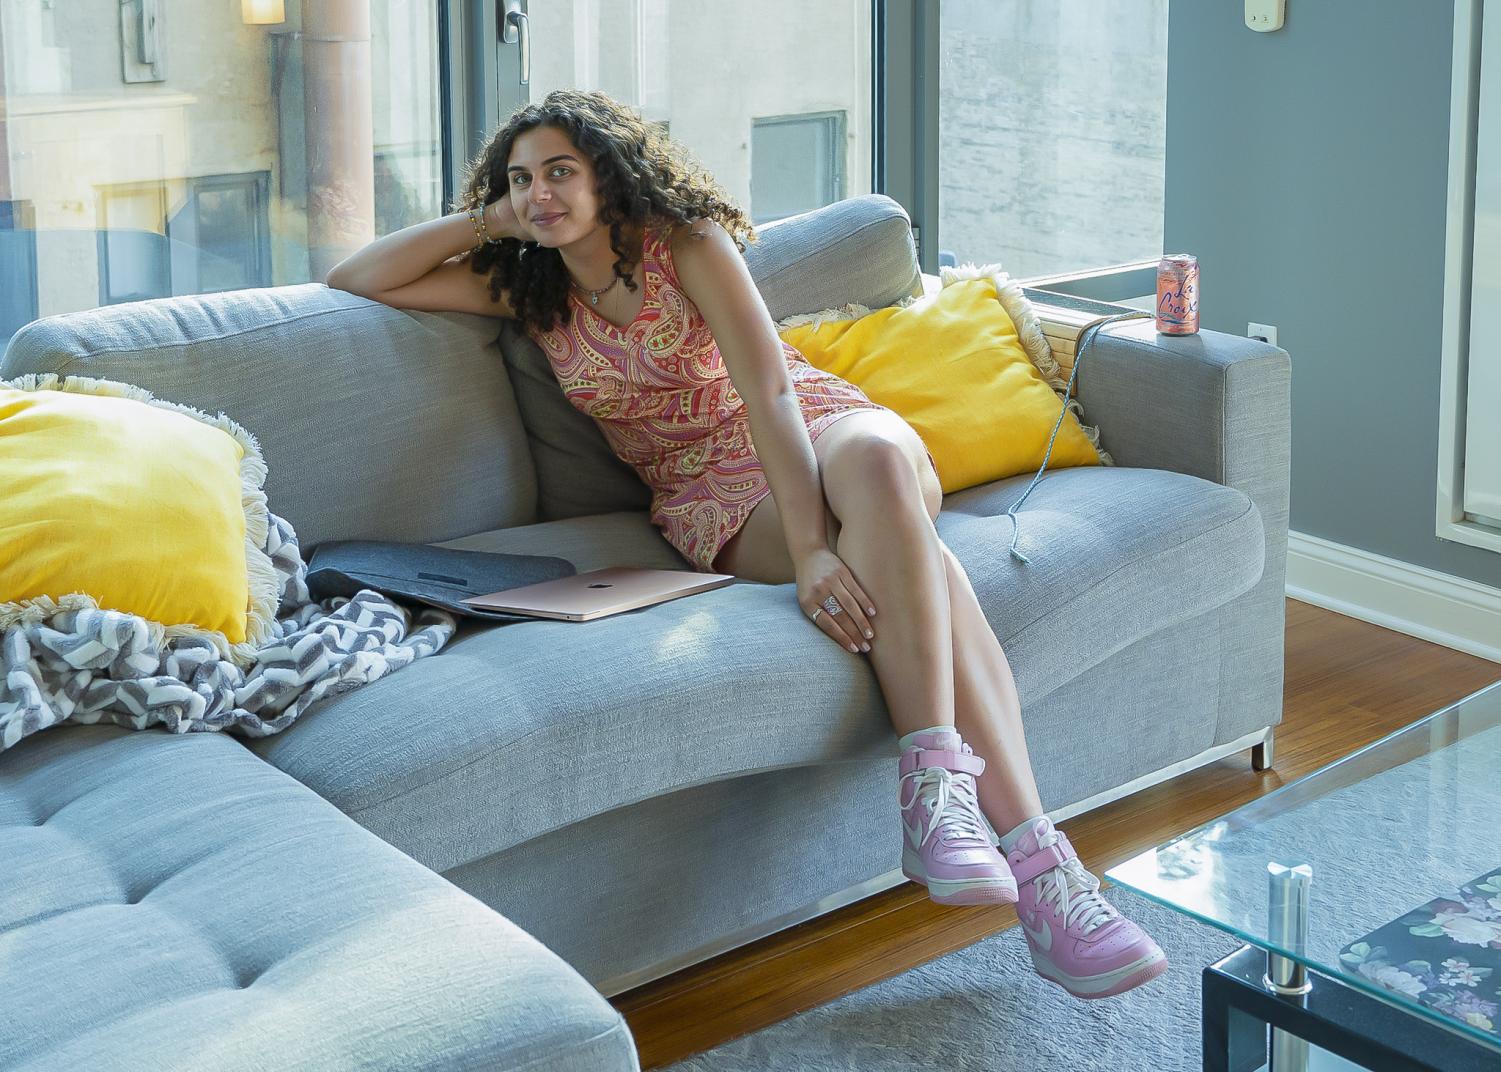 Adora Dayani in a pink-and-yellow patterned dress sits on a gray couch accompanied by yellow pillows.